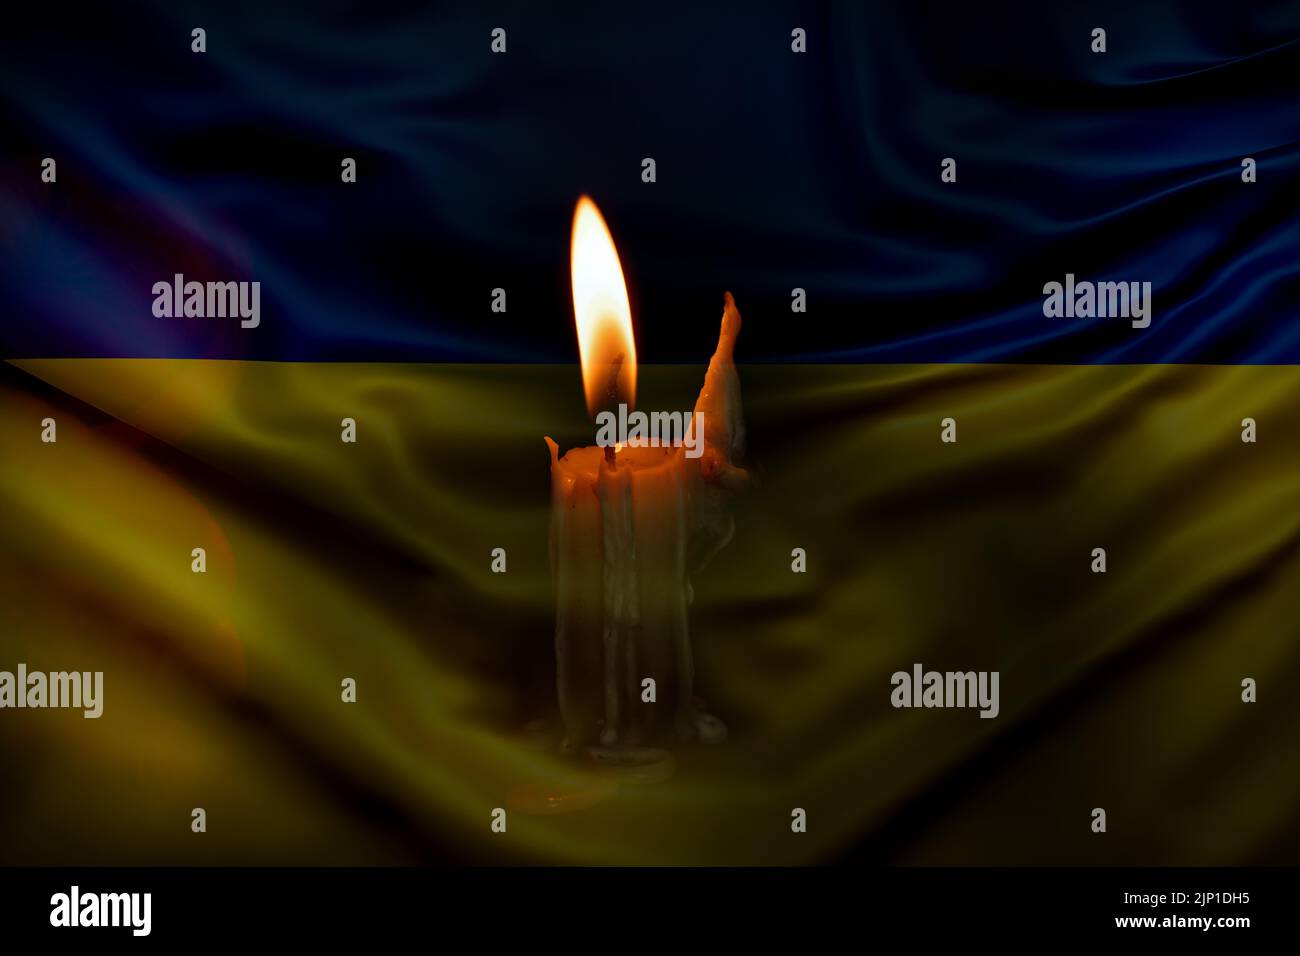 a burning candle against the background of the national flag of Ukraine, yellow-blue, peace in Ukraine, no war Stock Photo